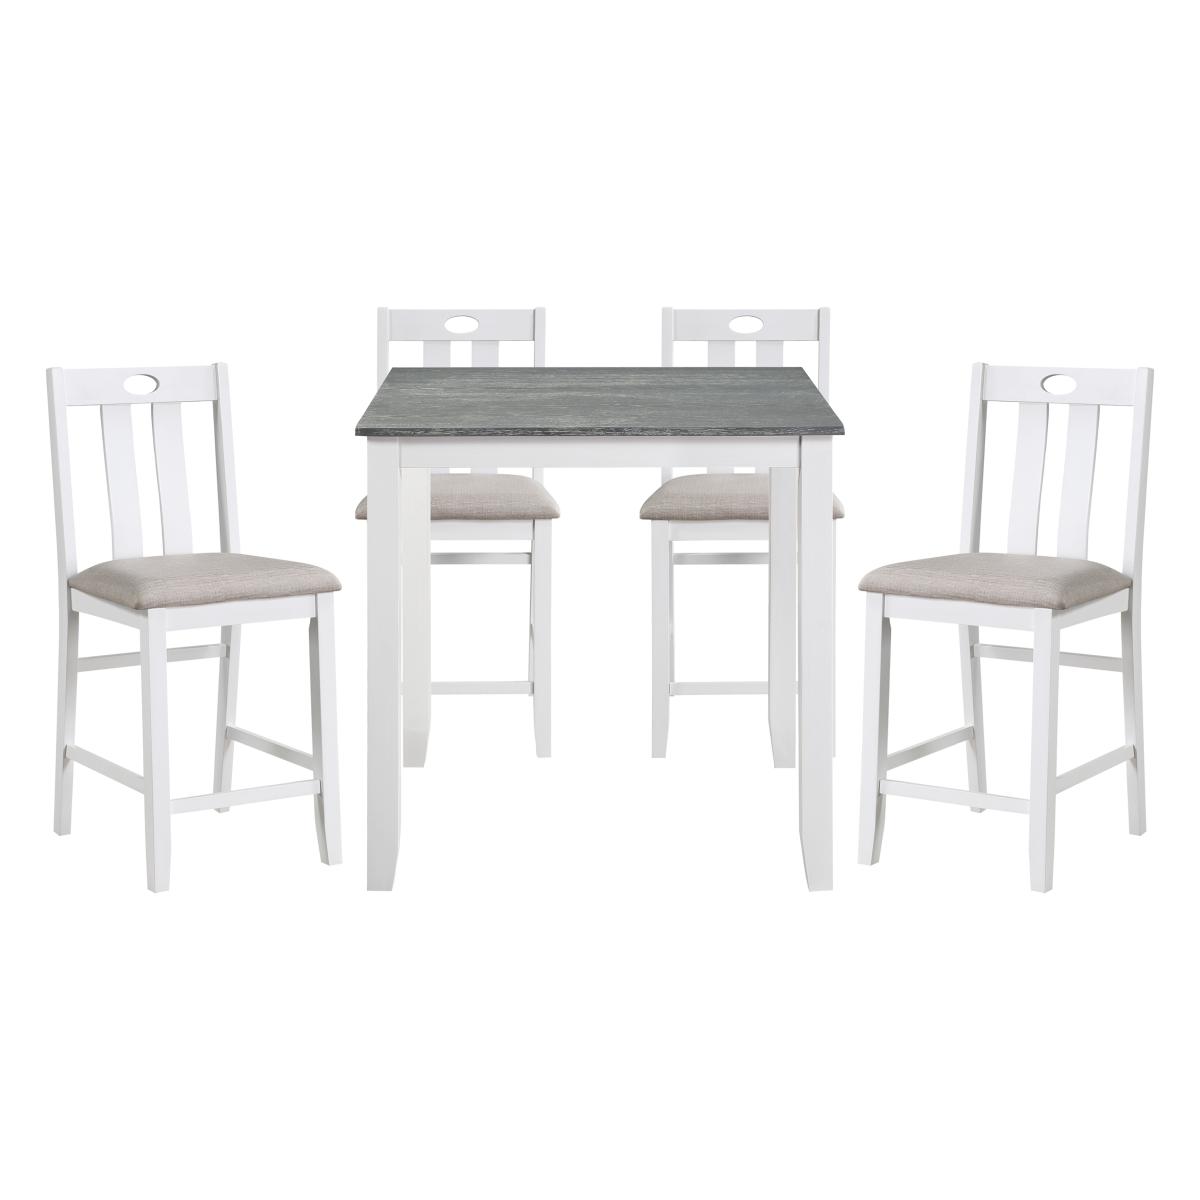 Transitional Counter Height Set 5744WH-36 5744WH-36 in White, Gray 